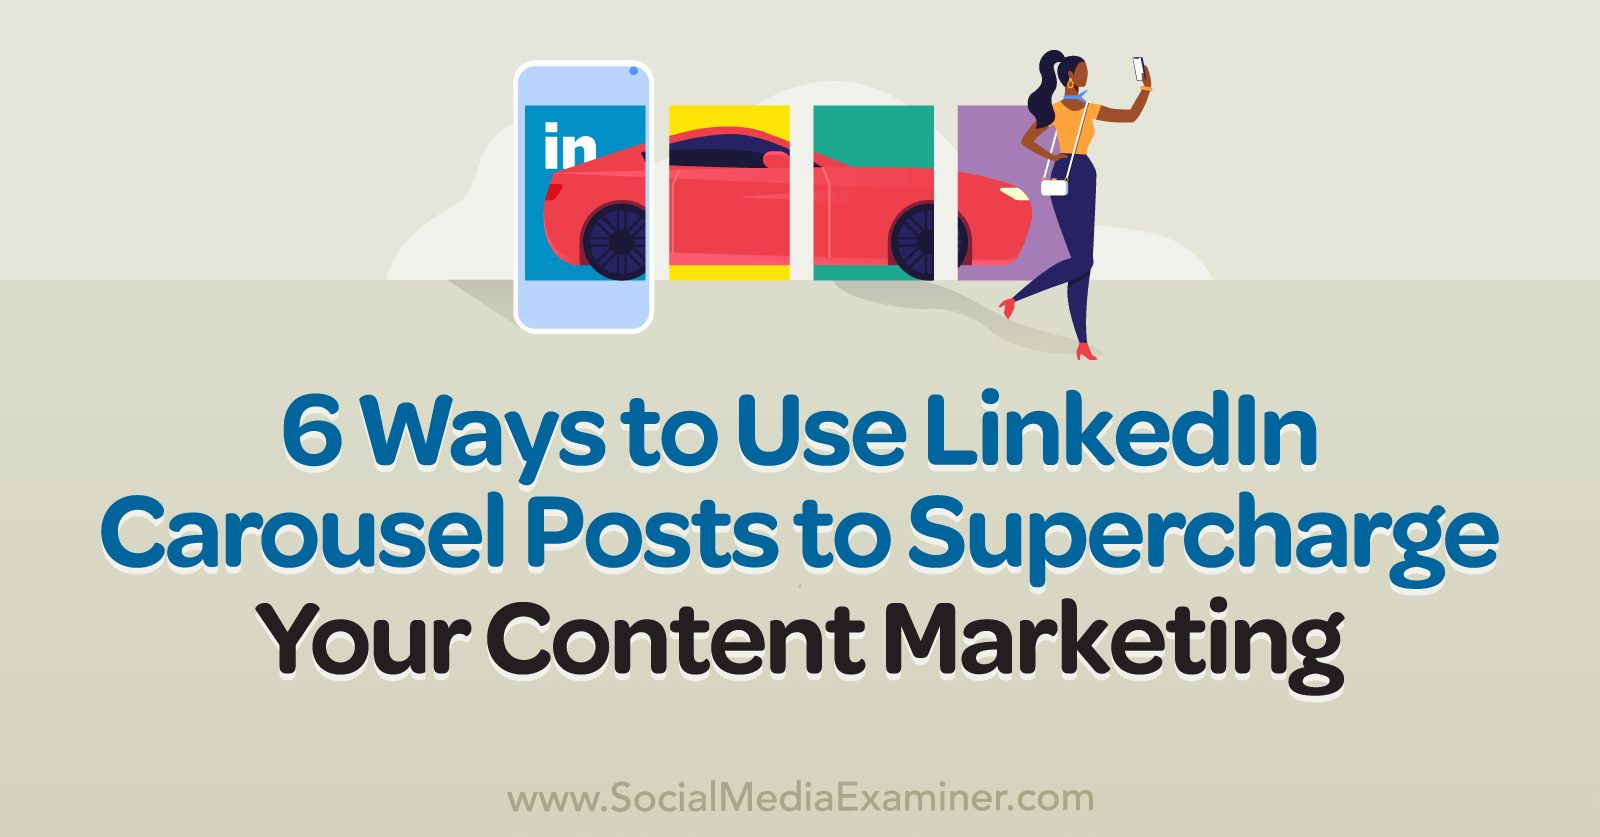 6 Ways to Use LinkedIn Carousel Posts to Supercharge Your Content Marketing by Social Media Examiner